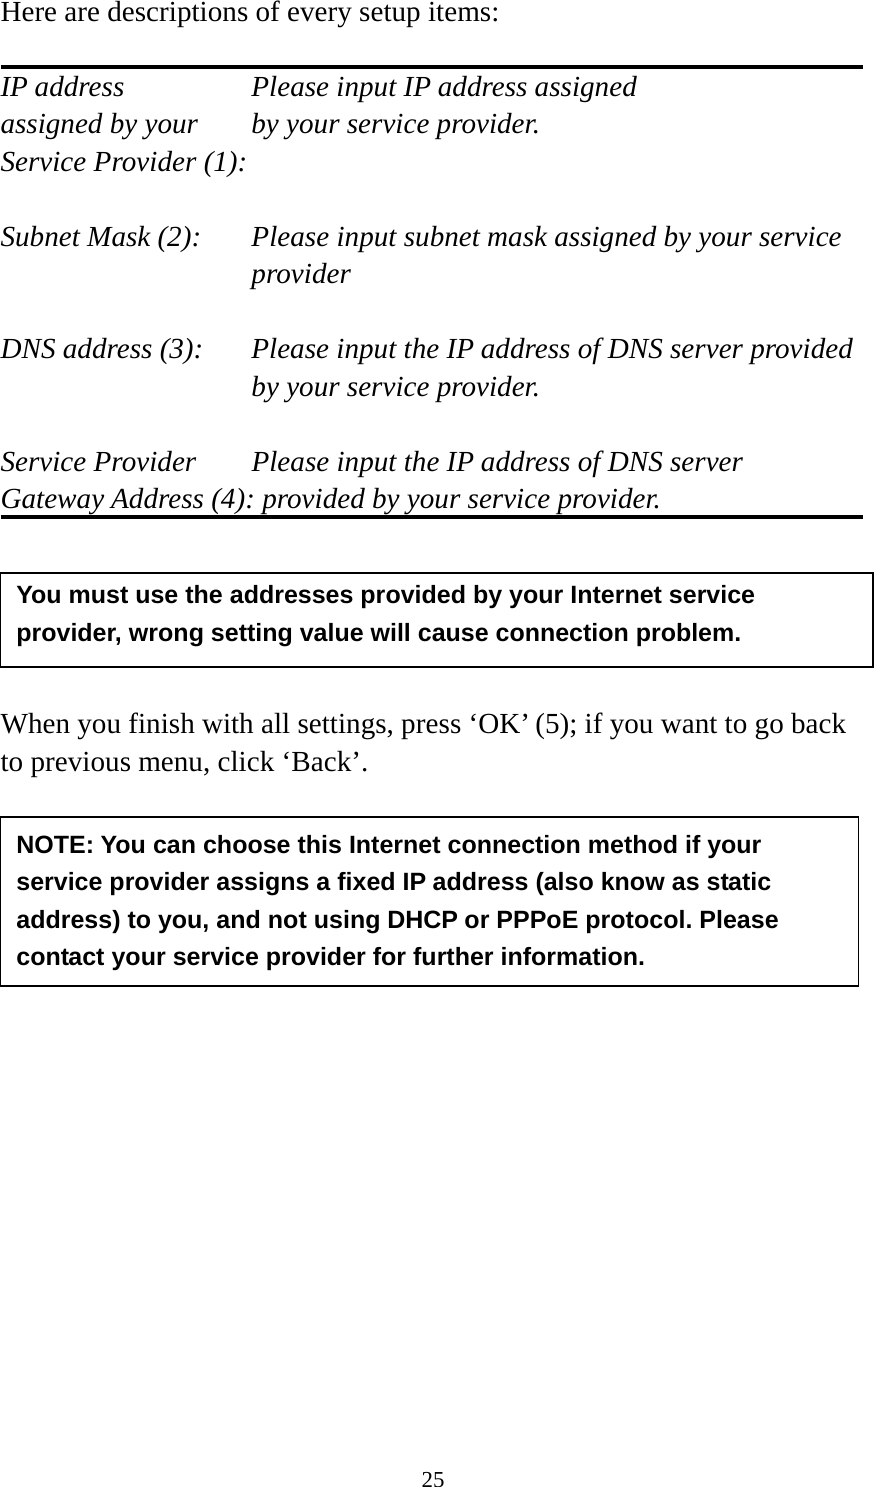 25 Here are descriptions of every setup items:  IP address        Please input IP address assigned assigned by your    by your service provider. Service Provider (1):    Subnet Mask (2):    Please input subnet mask assigned by your service provider   DNS address (3):    Please input the IP address of DNS server provided by your service provider.  Service Provider    Please input the IP address of DNS server Gateway Address (4): provided by your service provider.      When you finish with all settings, press ‘OK’ (5); if you want to go back to previous menu, click ‘Back’.                  NOTE: You can choose this Internet connection method if your service provider assigns a fixed IP address (also know as static address) to you, and not using DHCP or PPPoE protocol. Please contact your service provider for further information. You must use the addresses provided by your Internet service provider, wrong setting value will cause connection problem.   